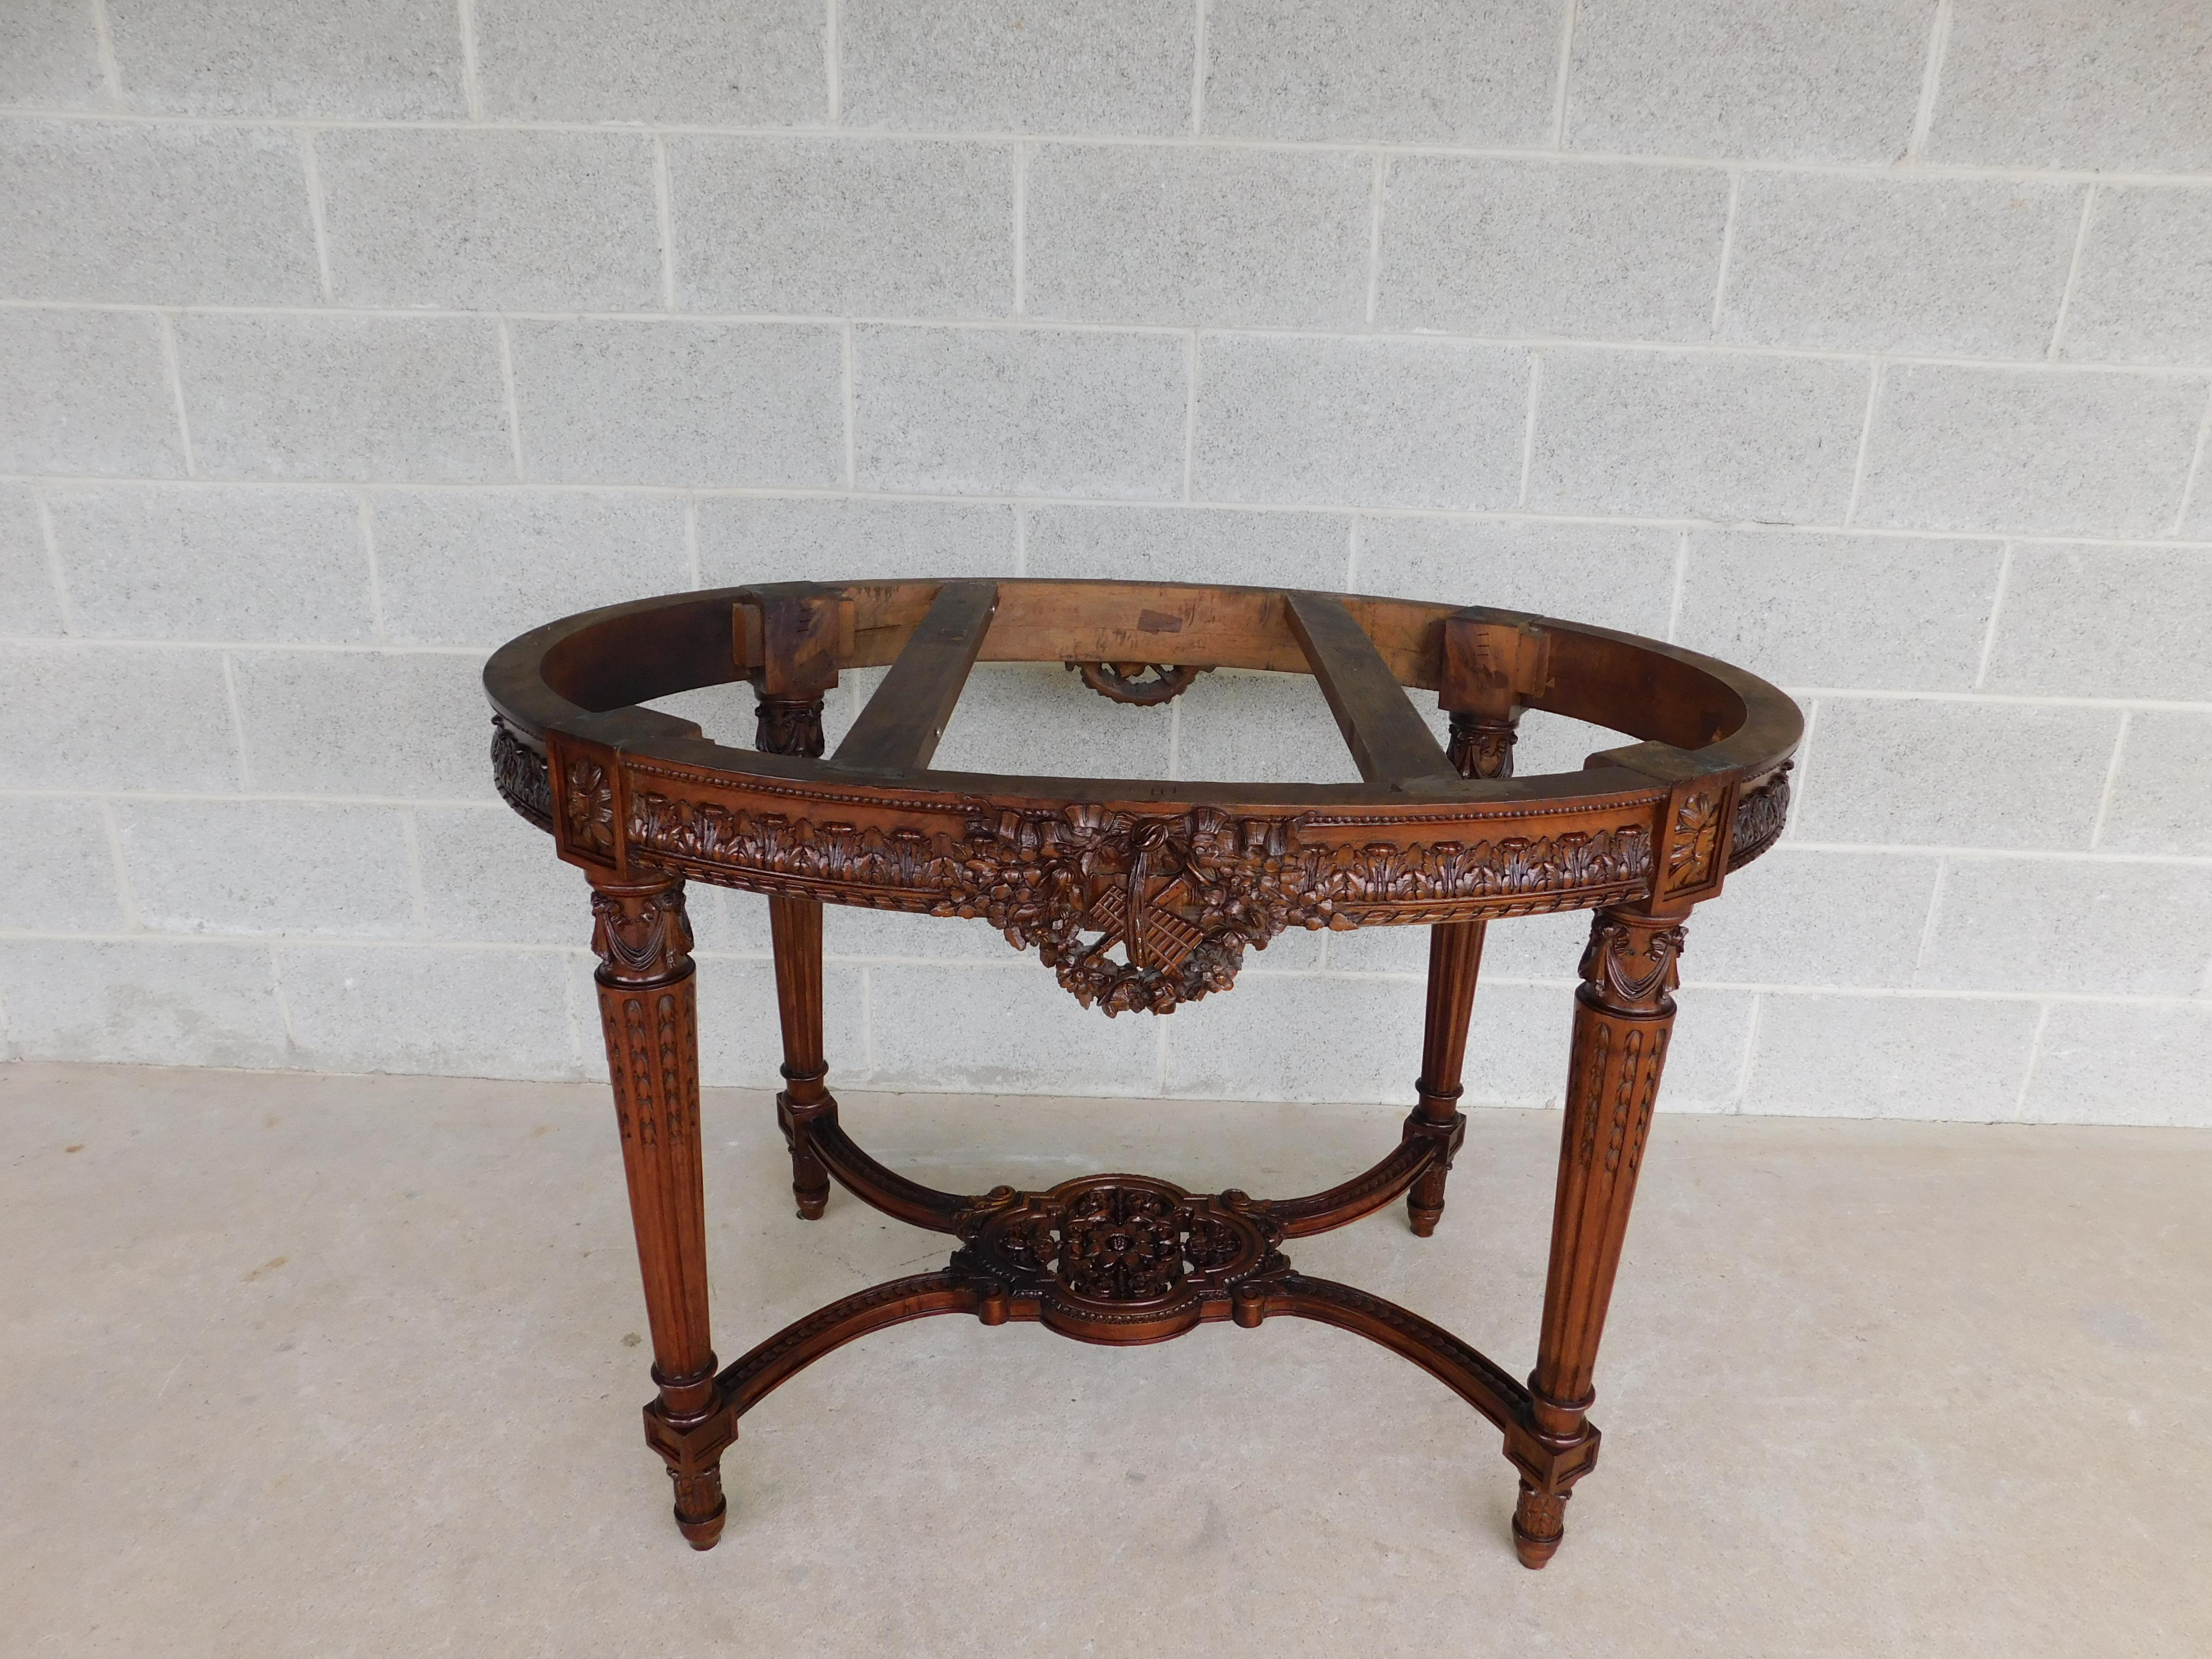 Marble Top over walnut carved and pierced frieze, tapered bell flower carved, and reeded legs. Carved undertier with blossom center. 

Excellent antique Condition,original finish, 

Measures: 30.5